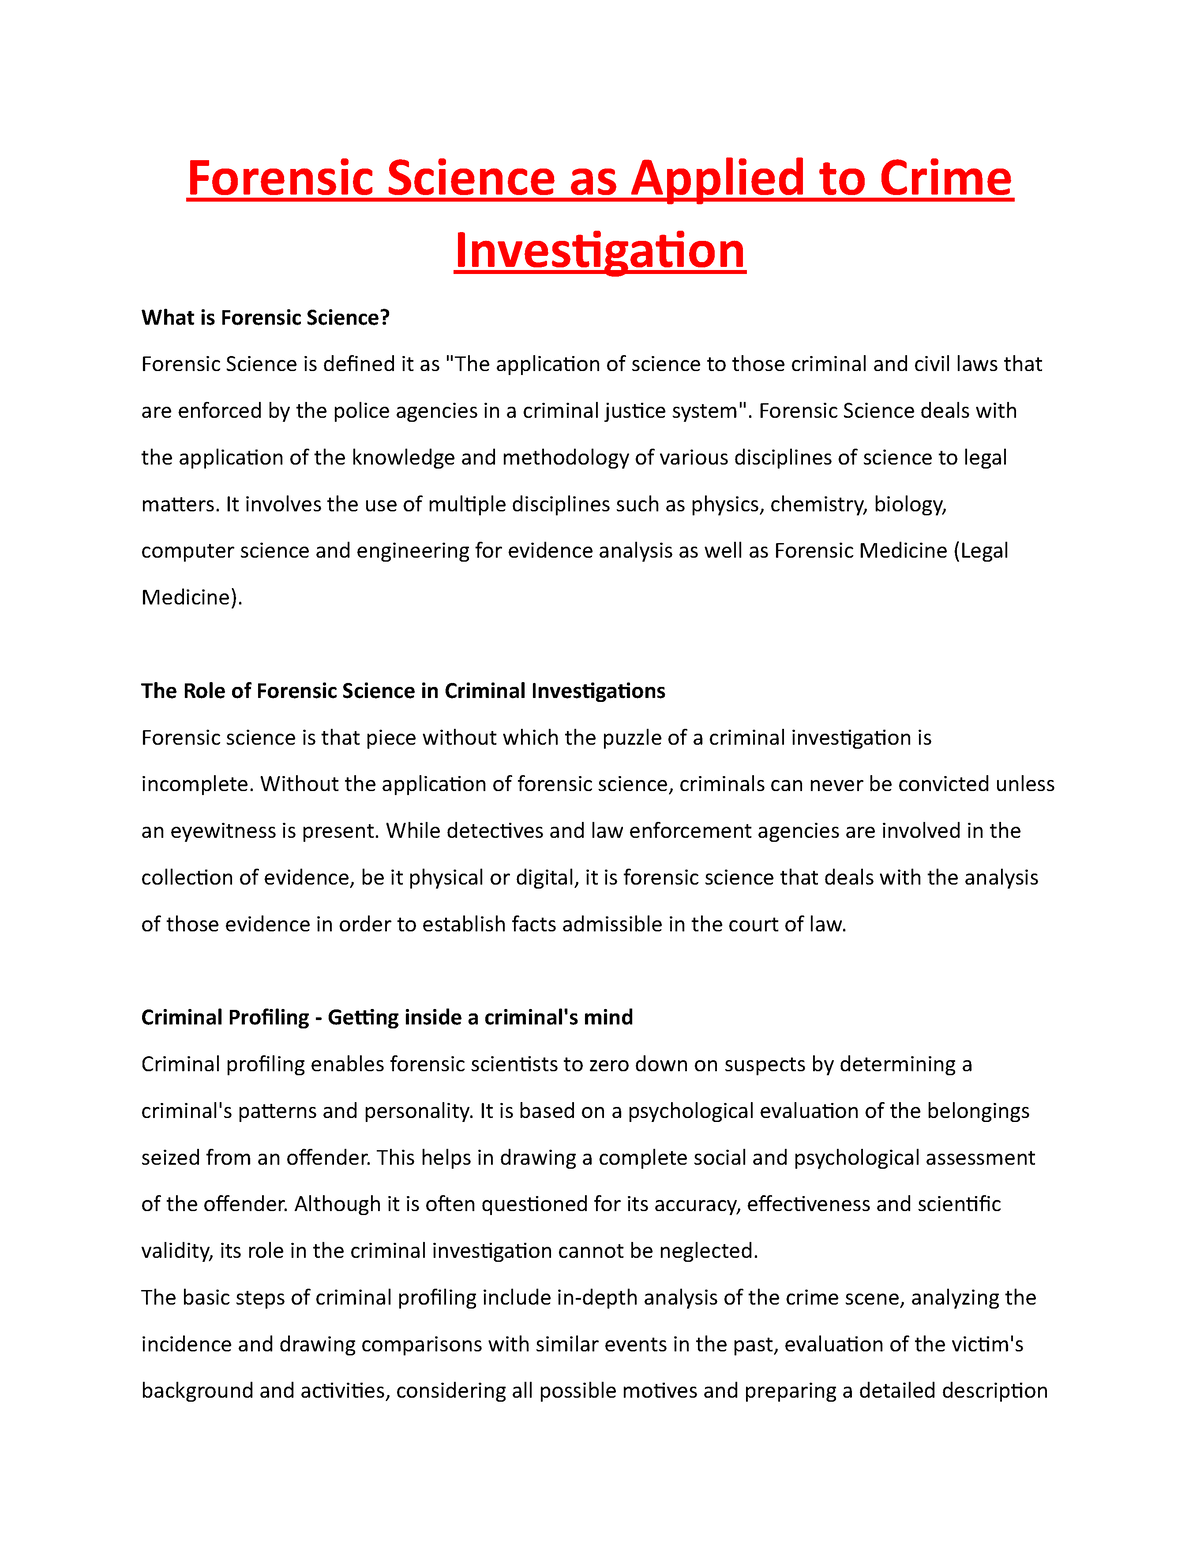 Forensic Science As Applied To Crime Investigation Forensic Science Deals With The Application 7460